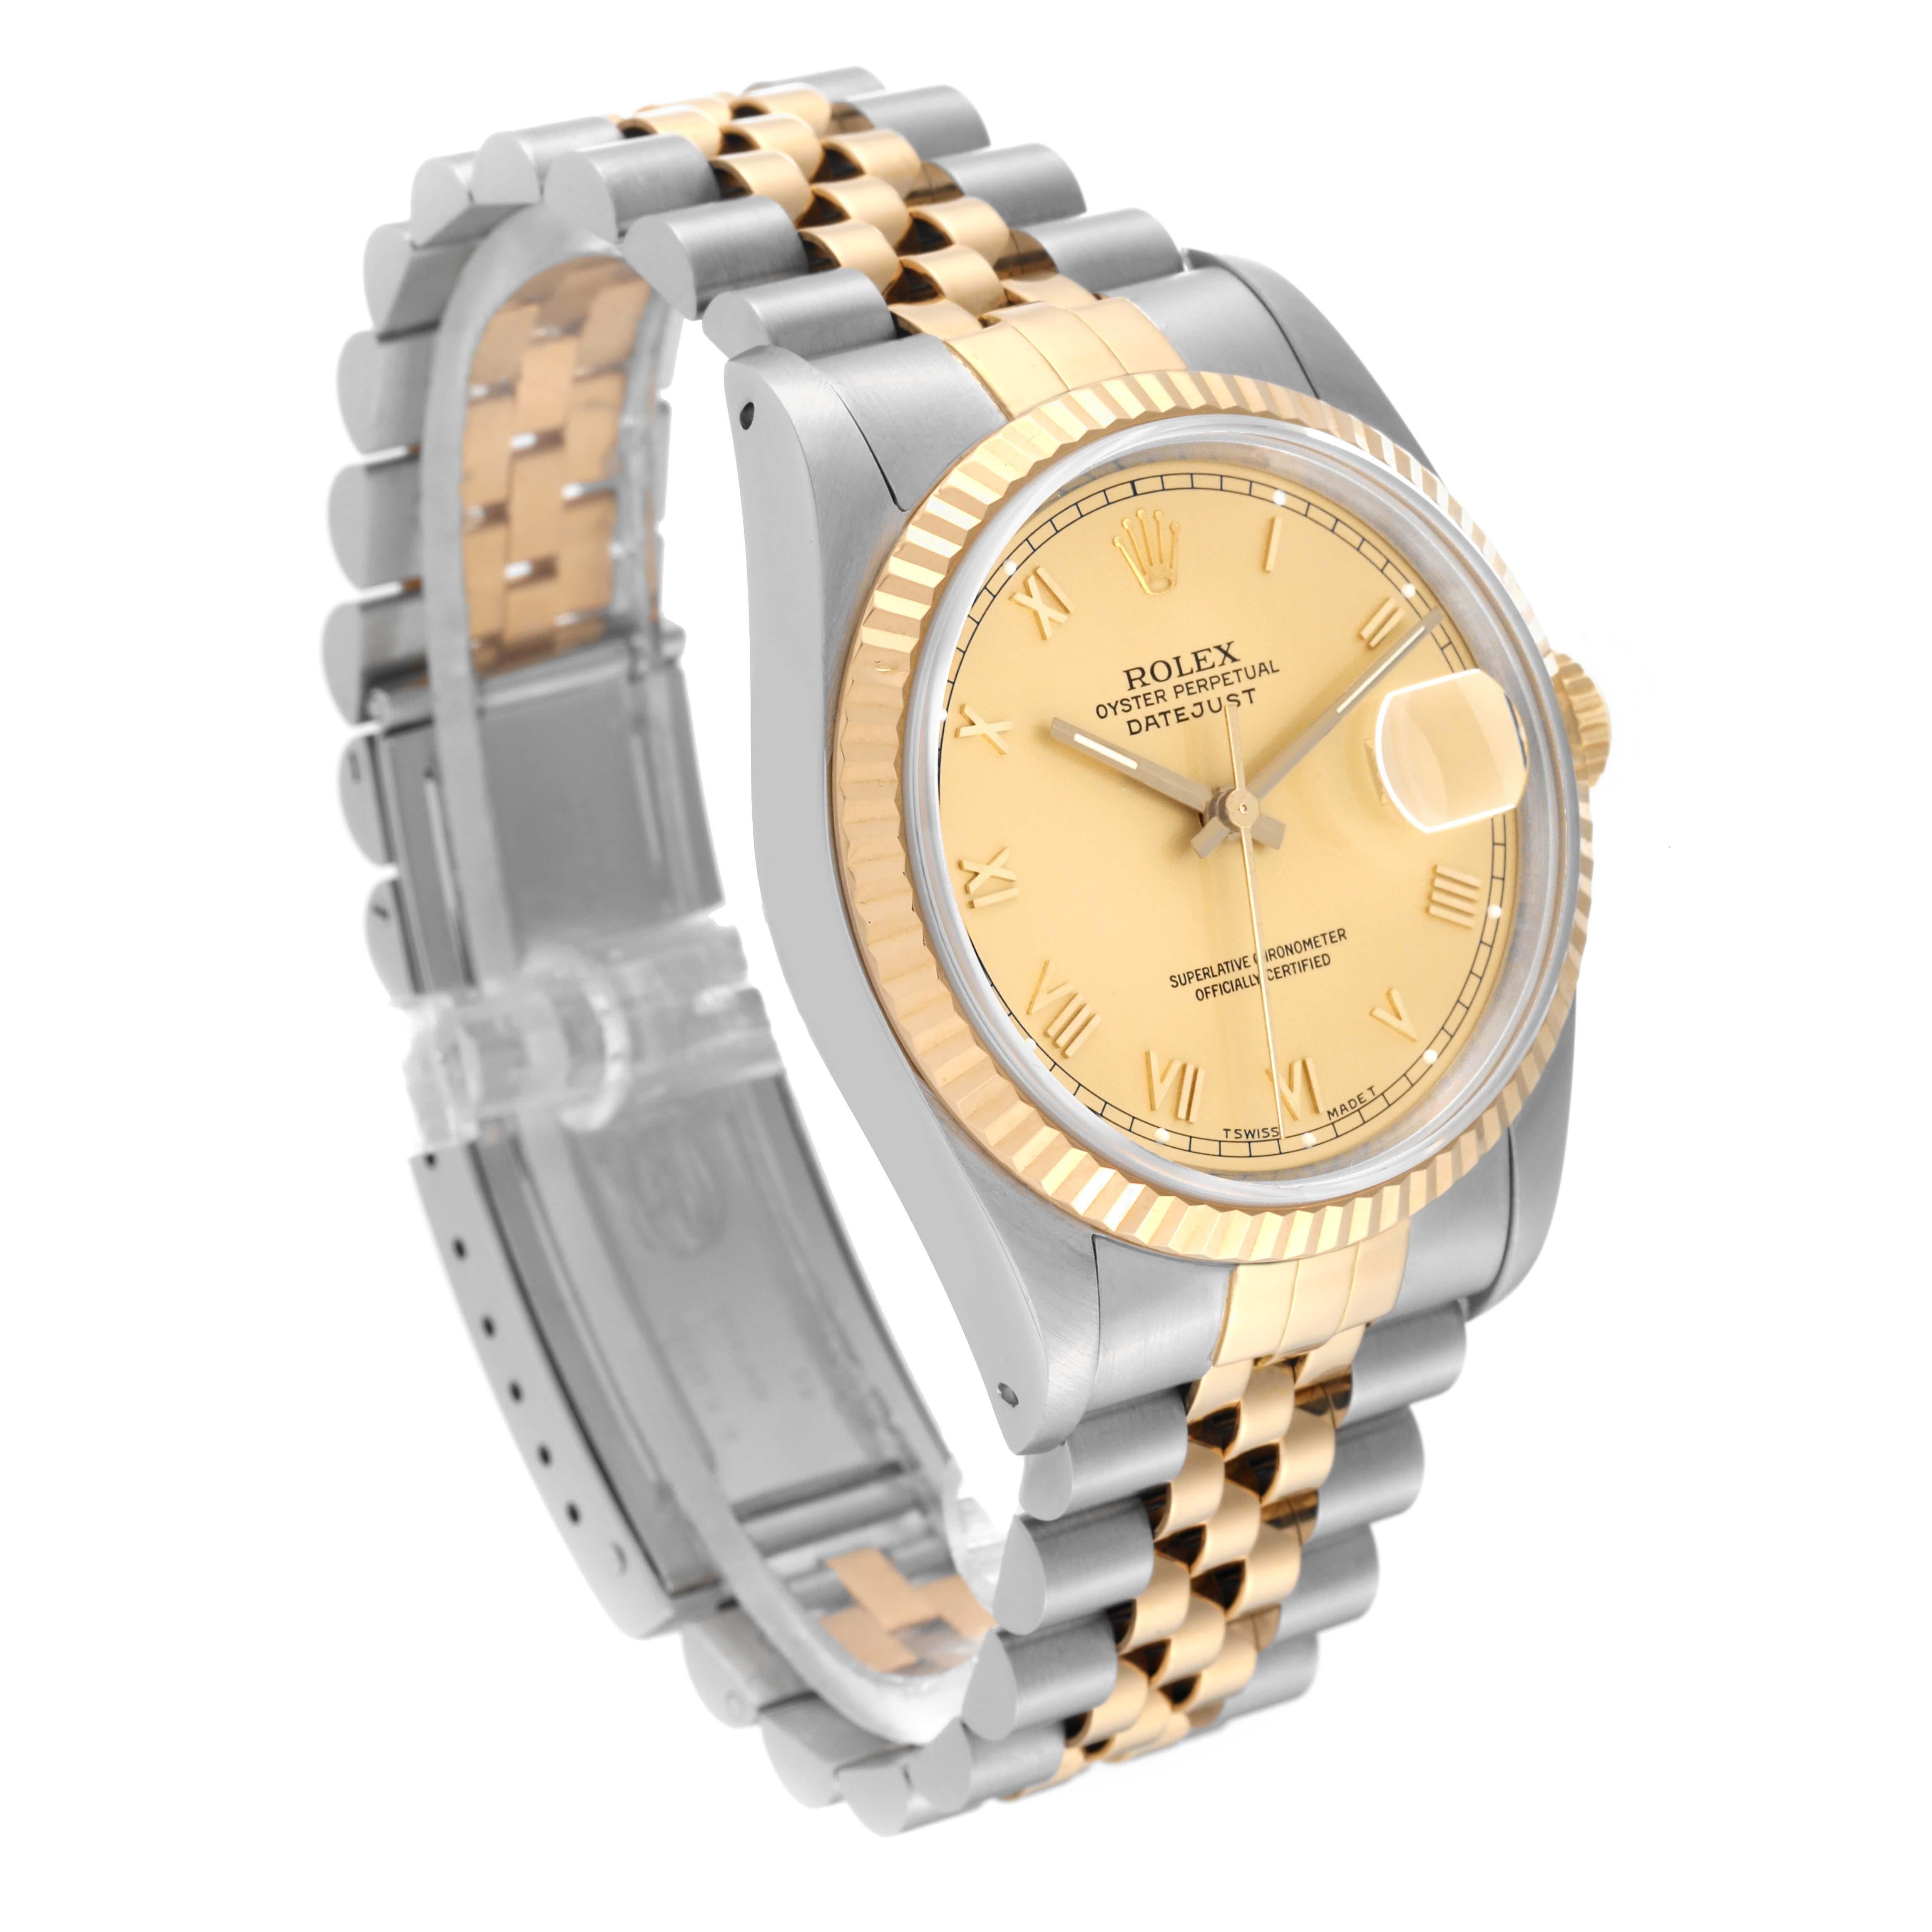 Rolex Datejust Steel Yellow Gold Champagne Dial Mens Watch 16233 For Sale 4